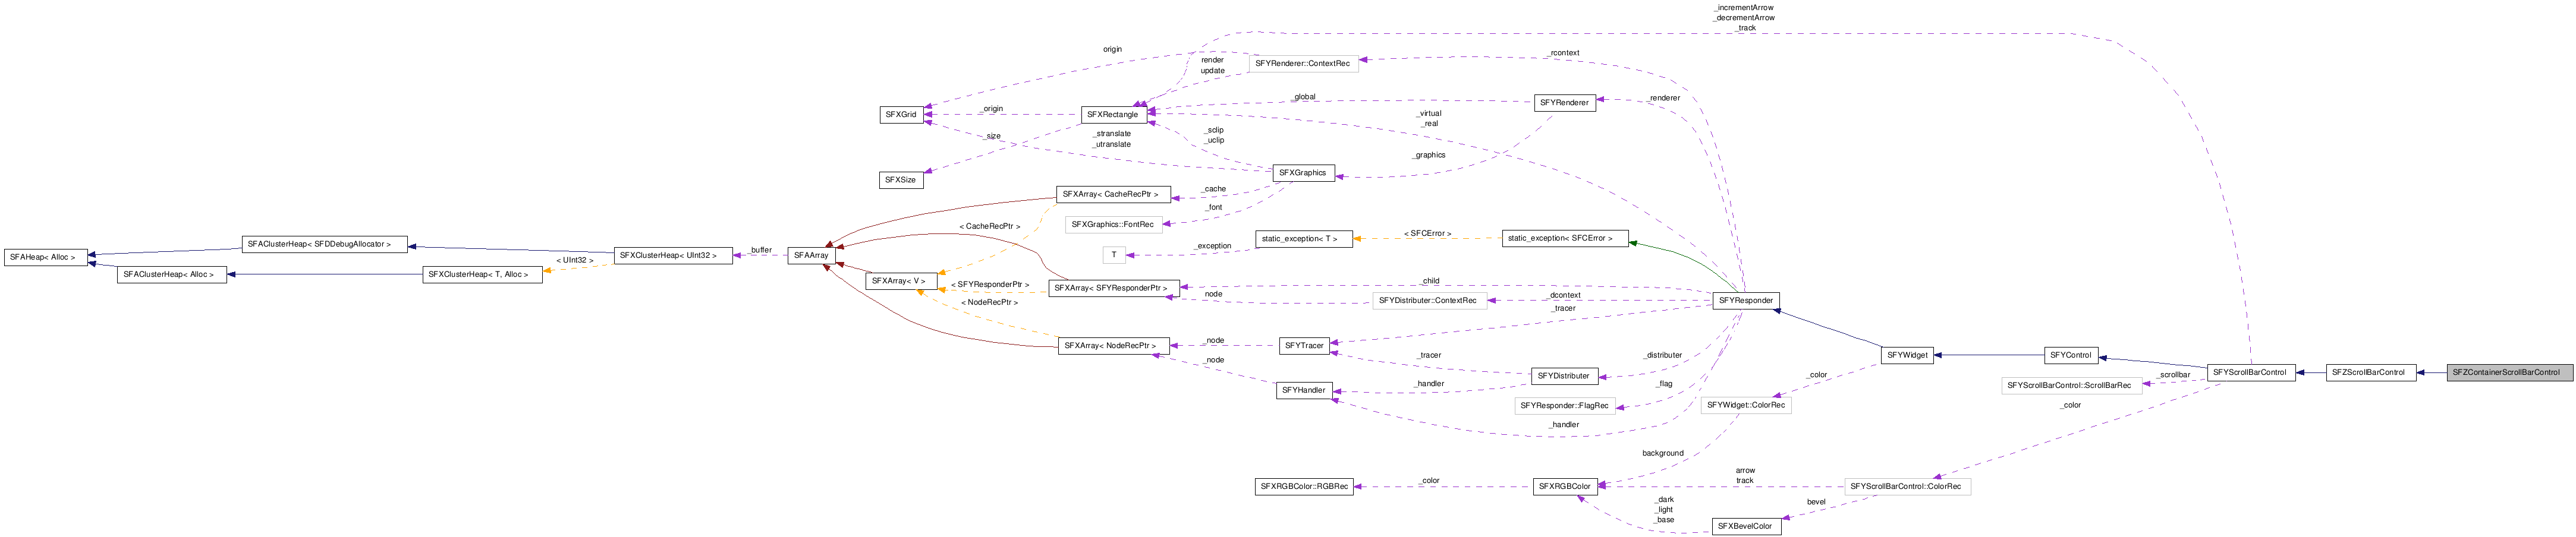  Collaboration diagram of SFZContainerScrollBarControlClass